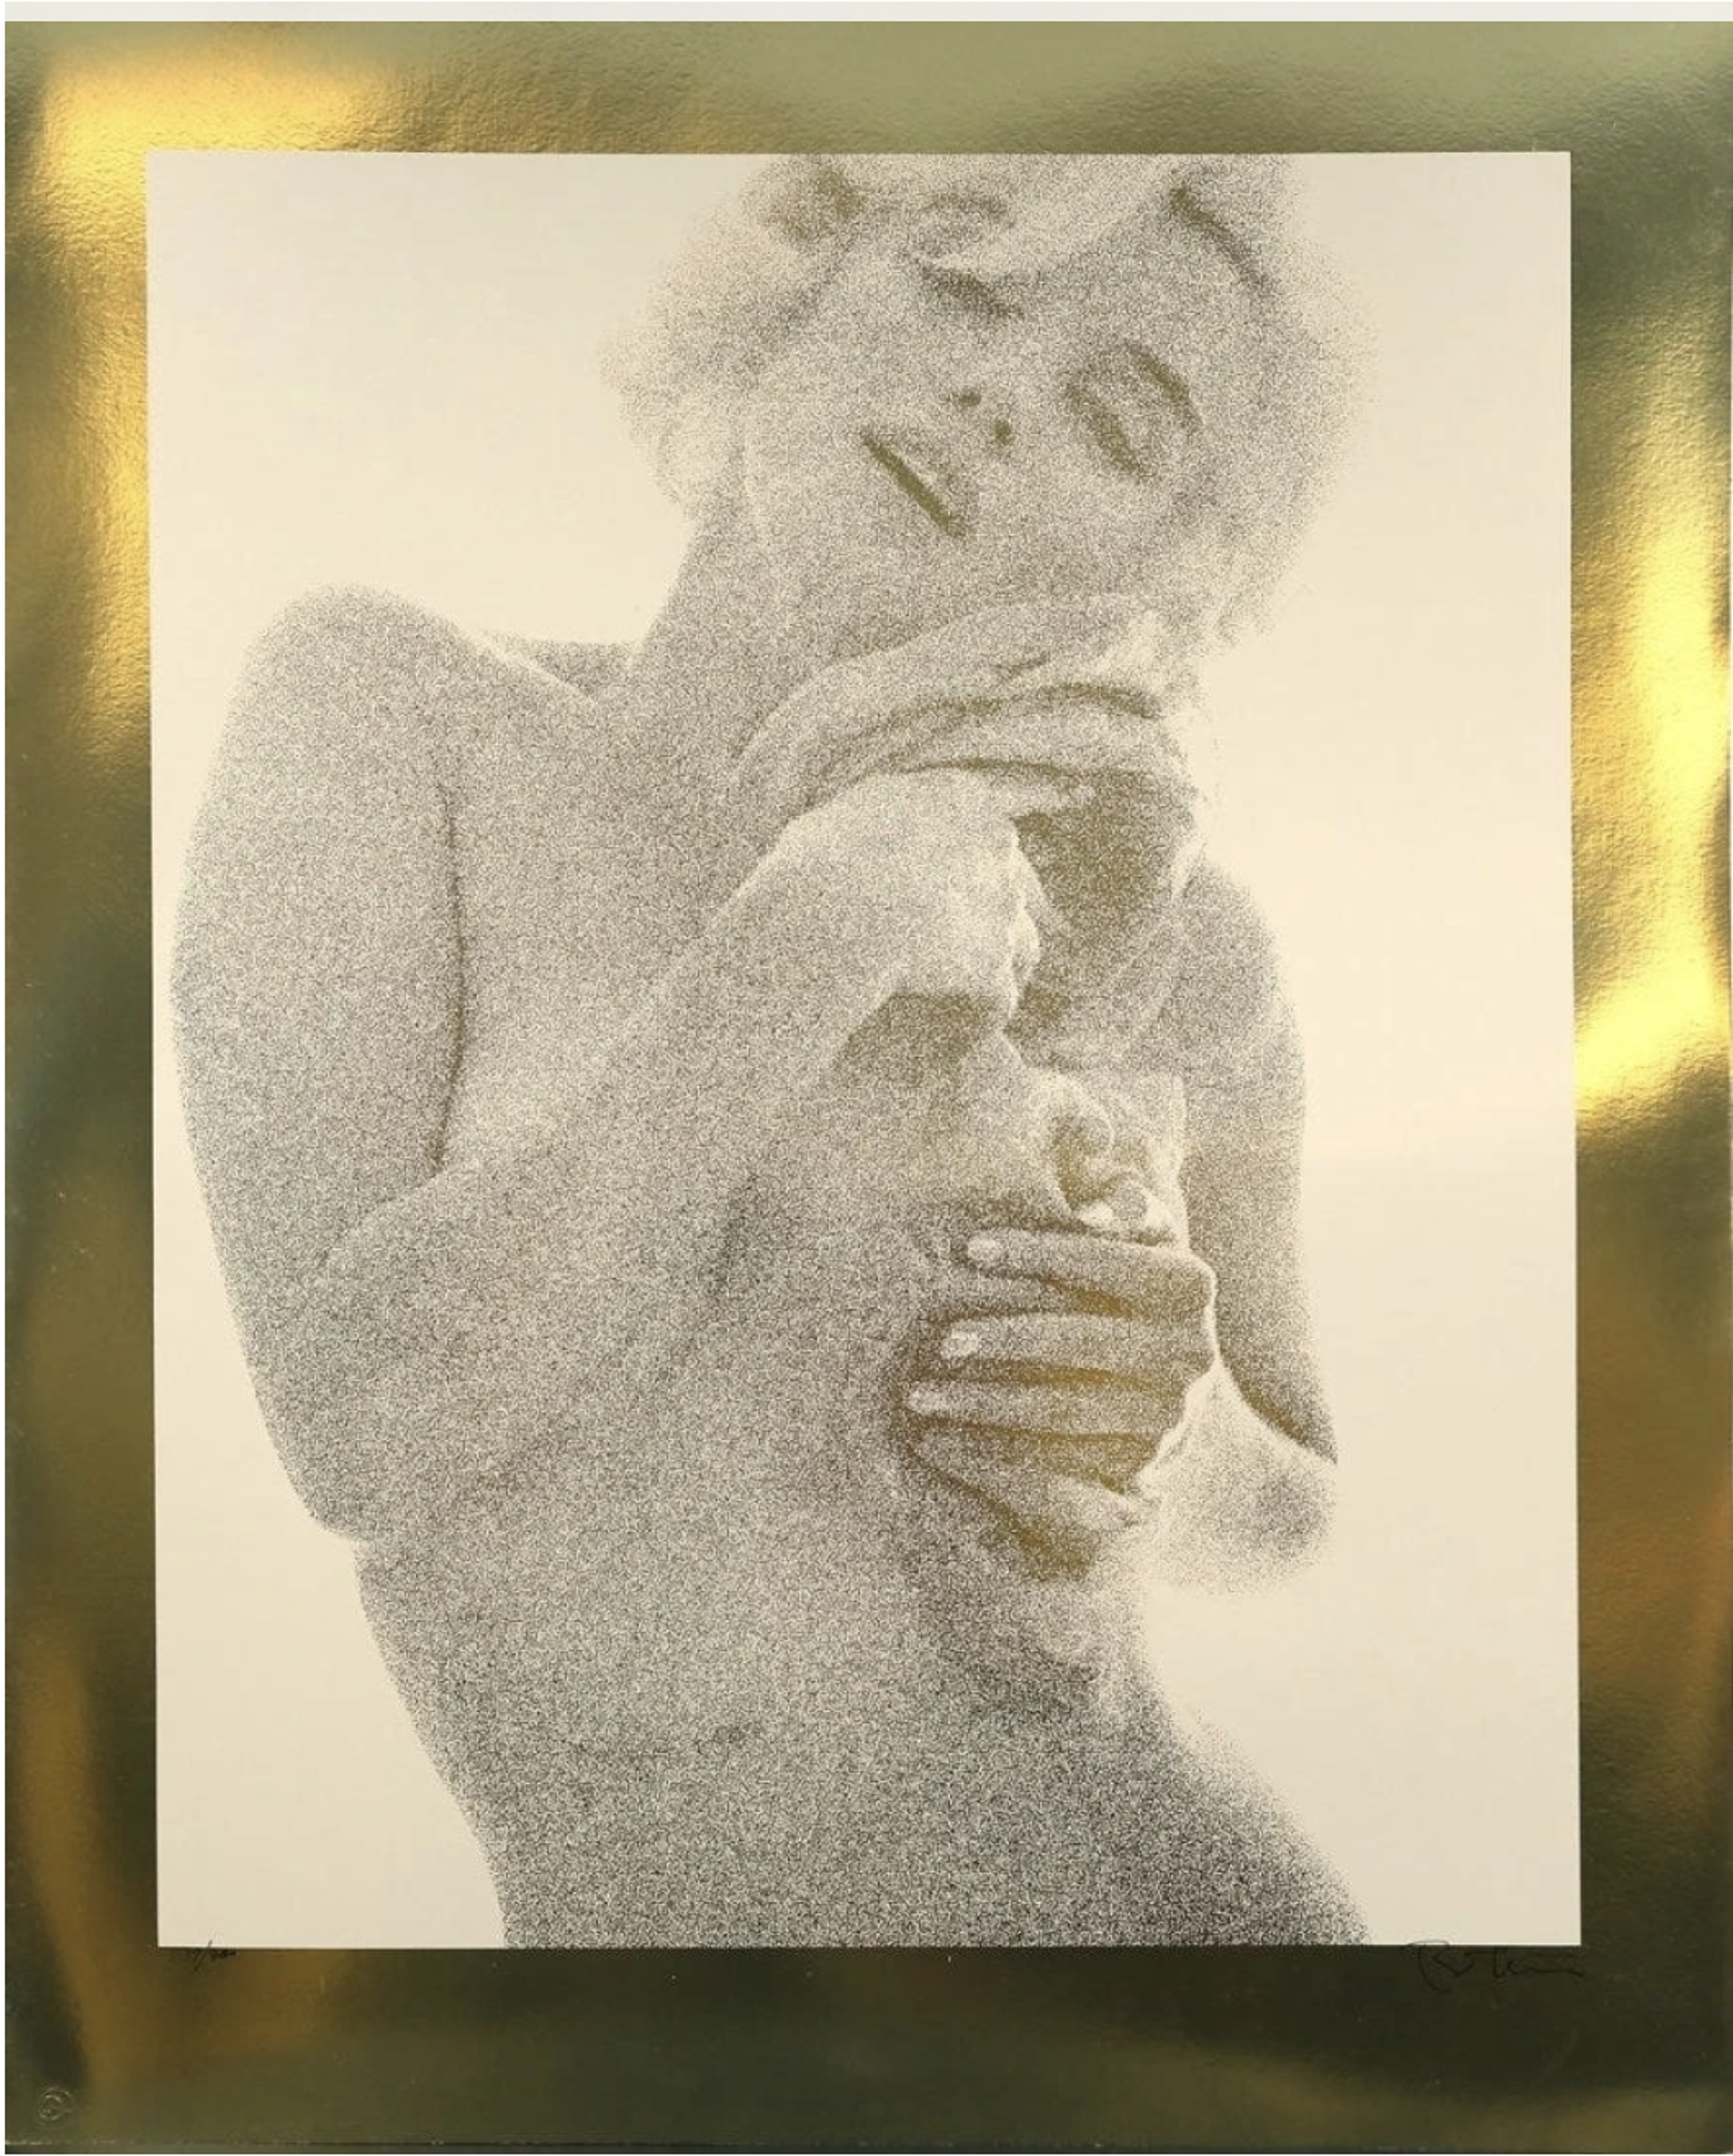 Marilyn Monroe with Roses (from The Last Sitting) by Bert Stern